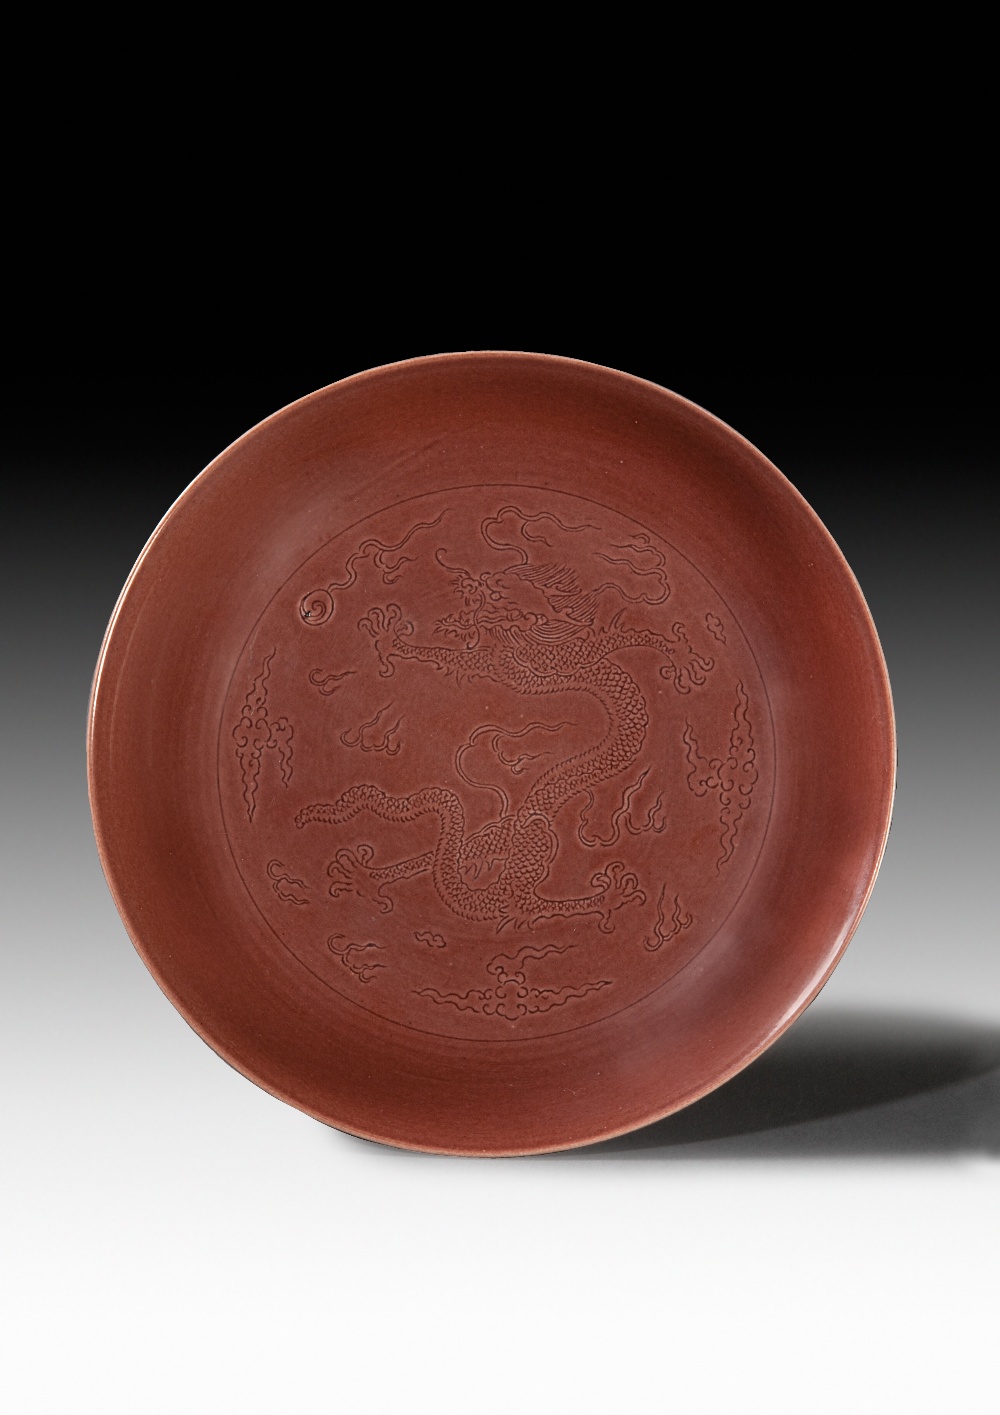 AN AUBERGINE-GLAZED DRAGON CHASING A FLAMING PEARL DISH, JIAQING MARK AND PERIOD, D: 7.6 cm.
With